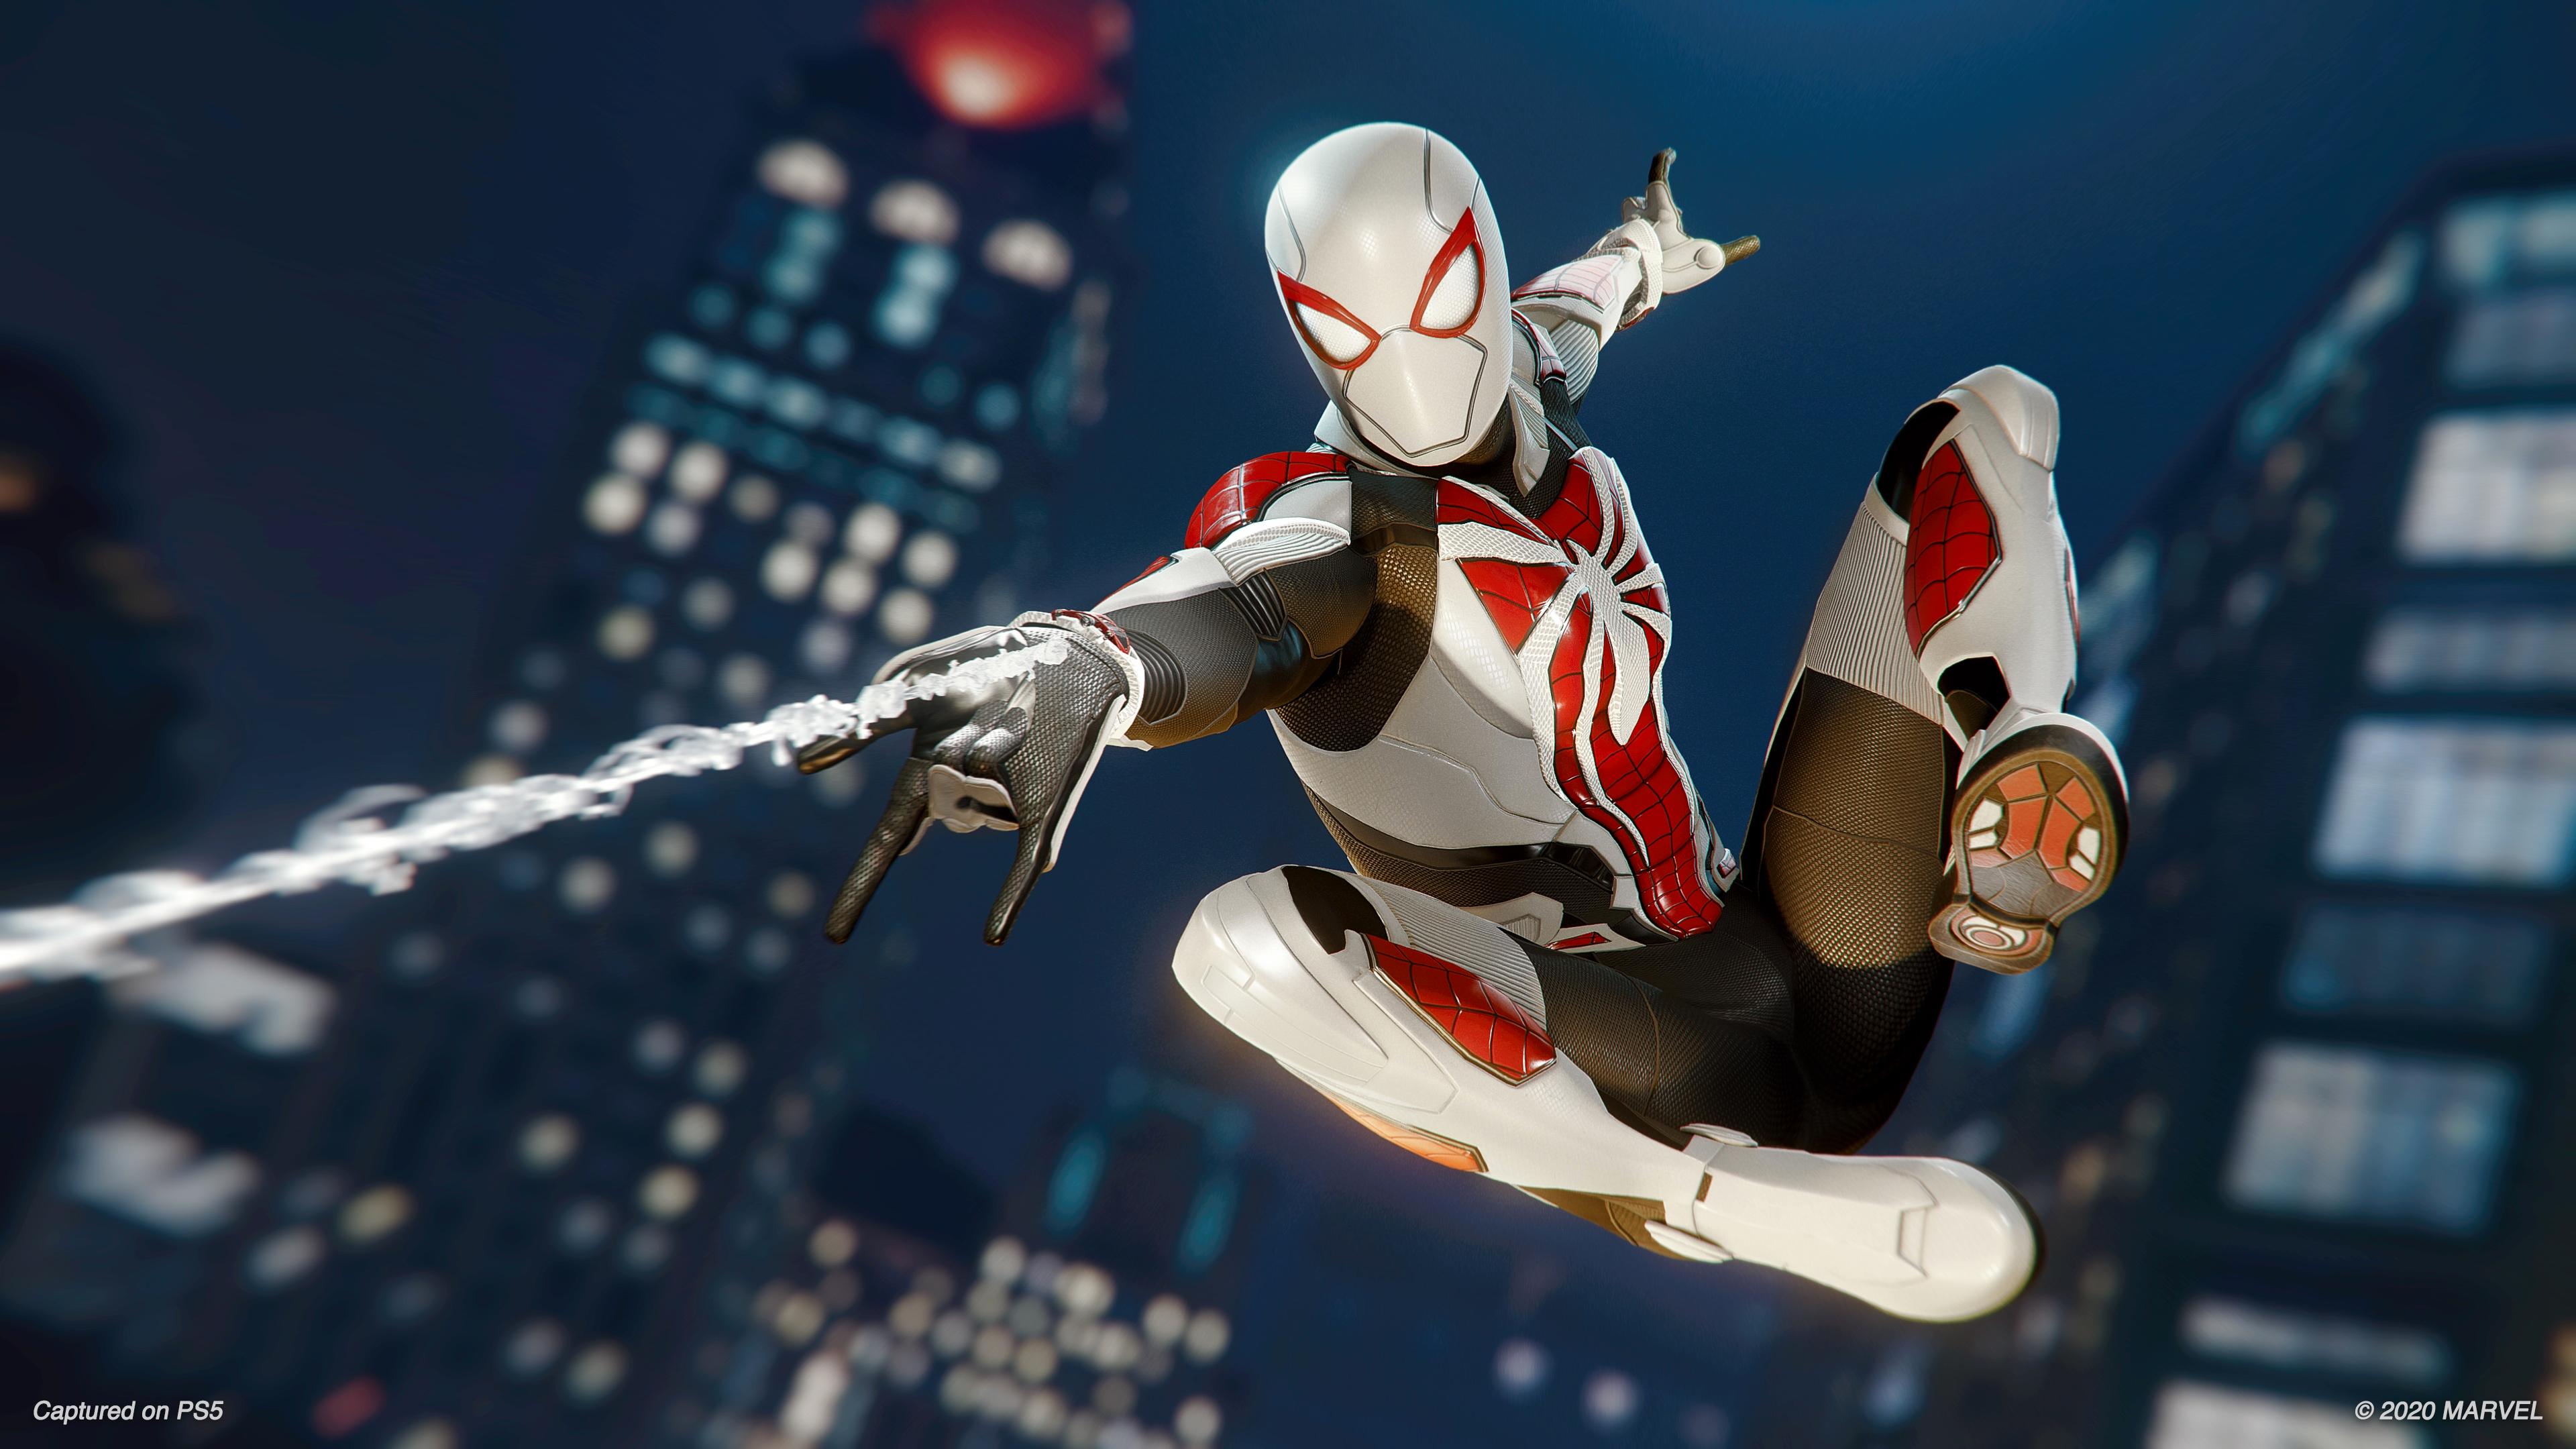 Spider-Man PS4 Version Gets Exciting Additions With the Latest Update -  EssentiallySports